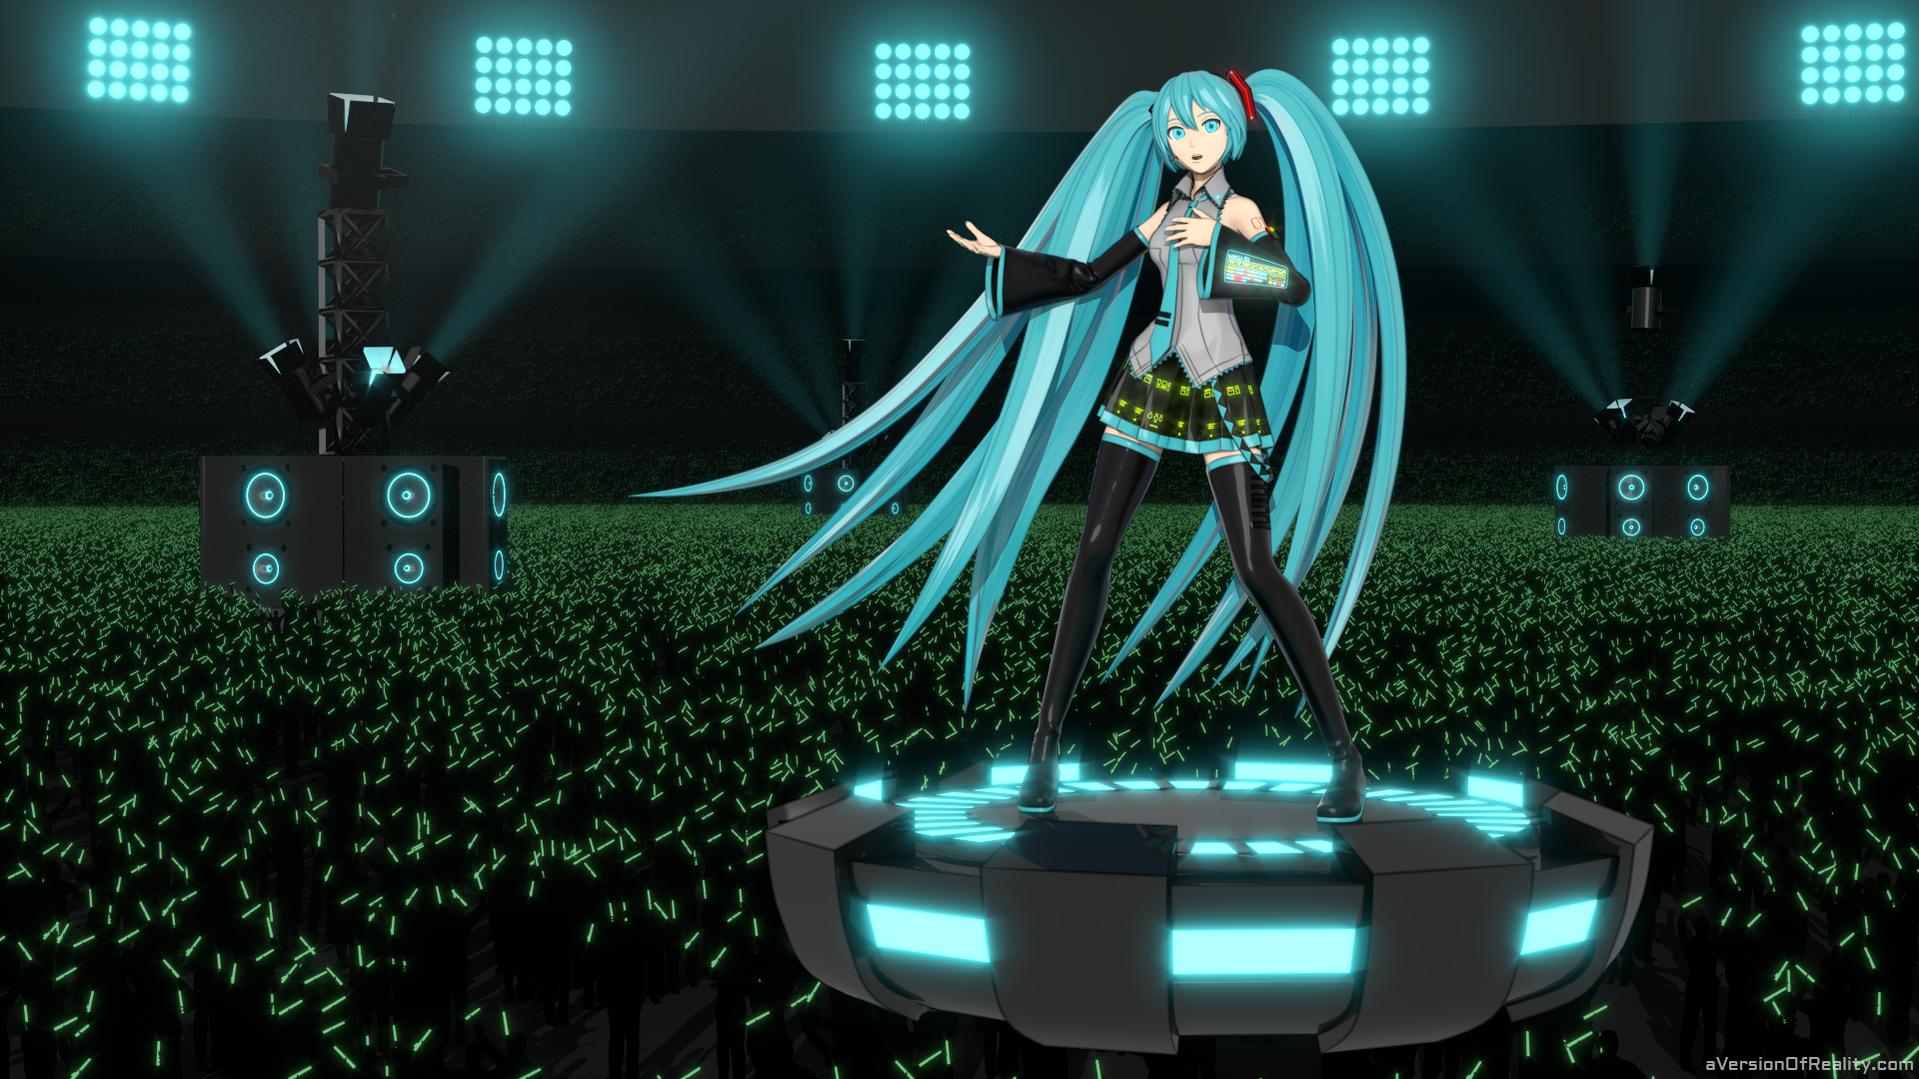 Hatsune Miku in concert Finished Projects Blender Artists Community